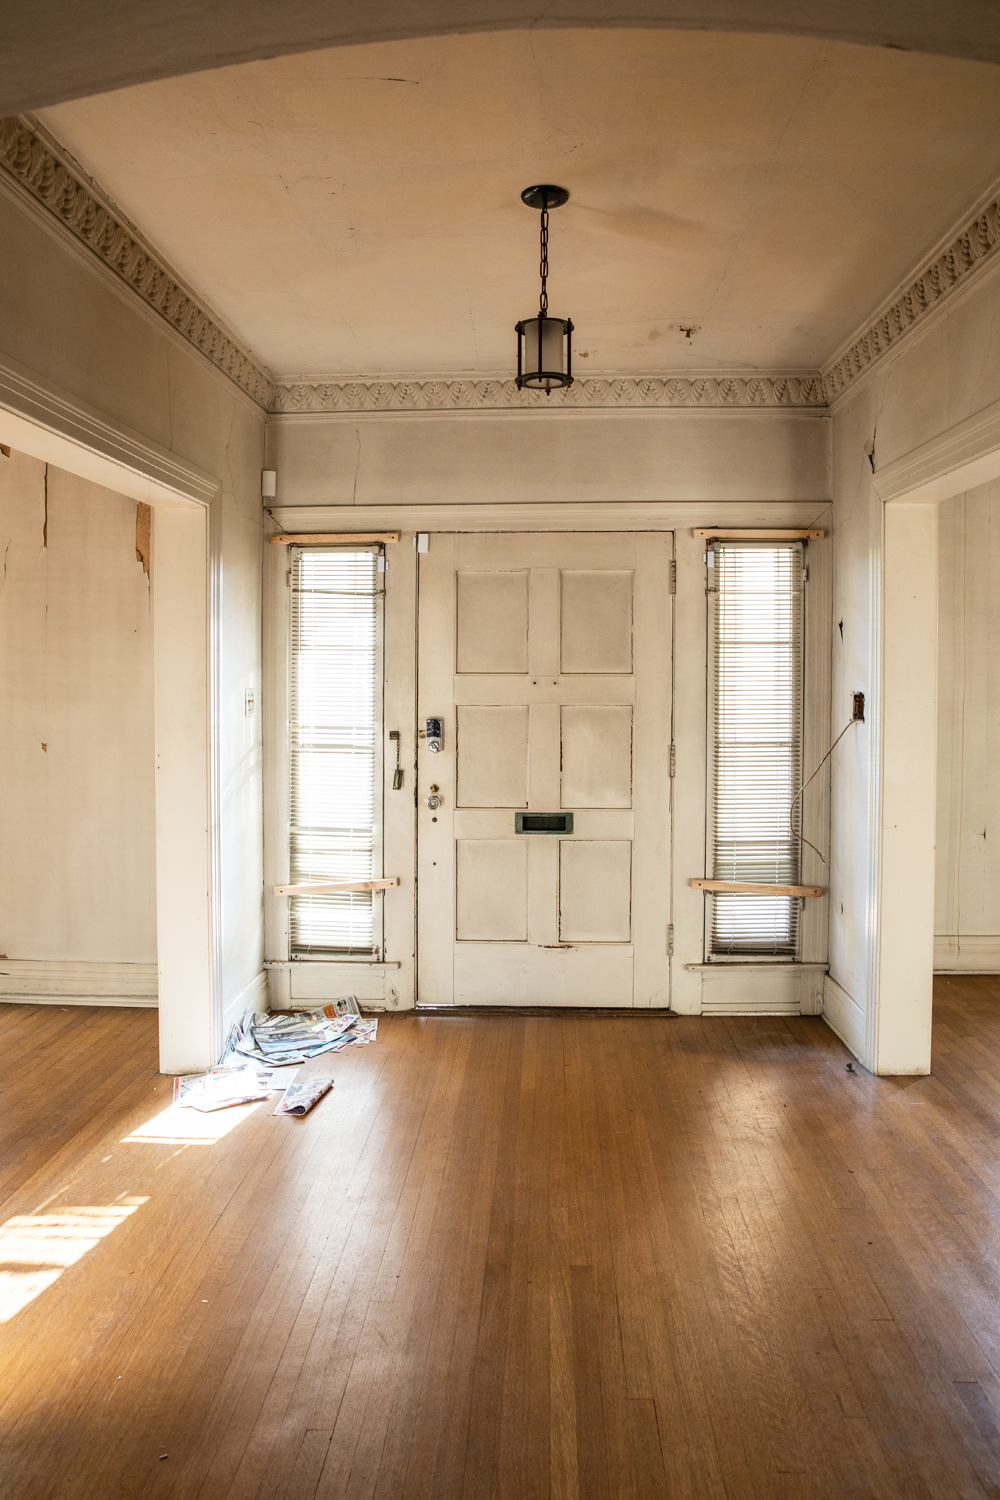 A rundown down Los Angeles mansion with a ramshackle front entryway